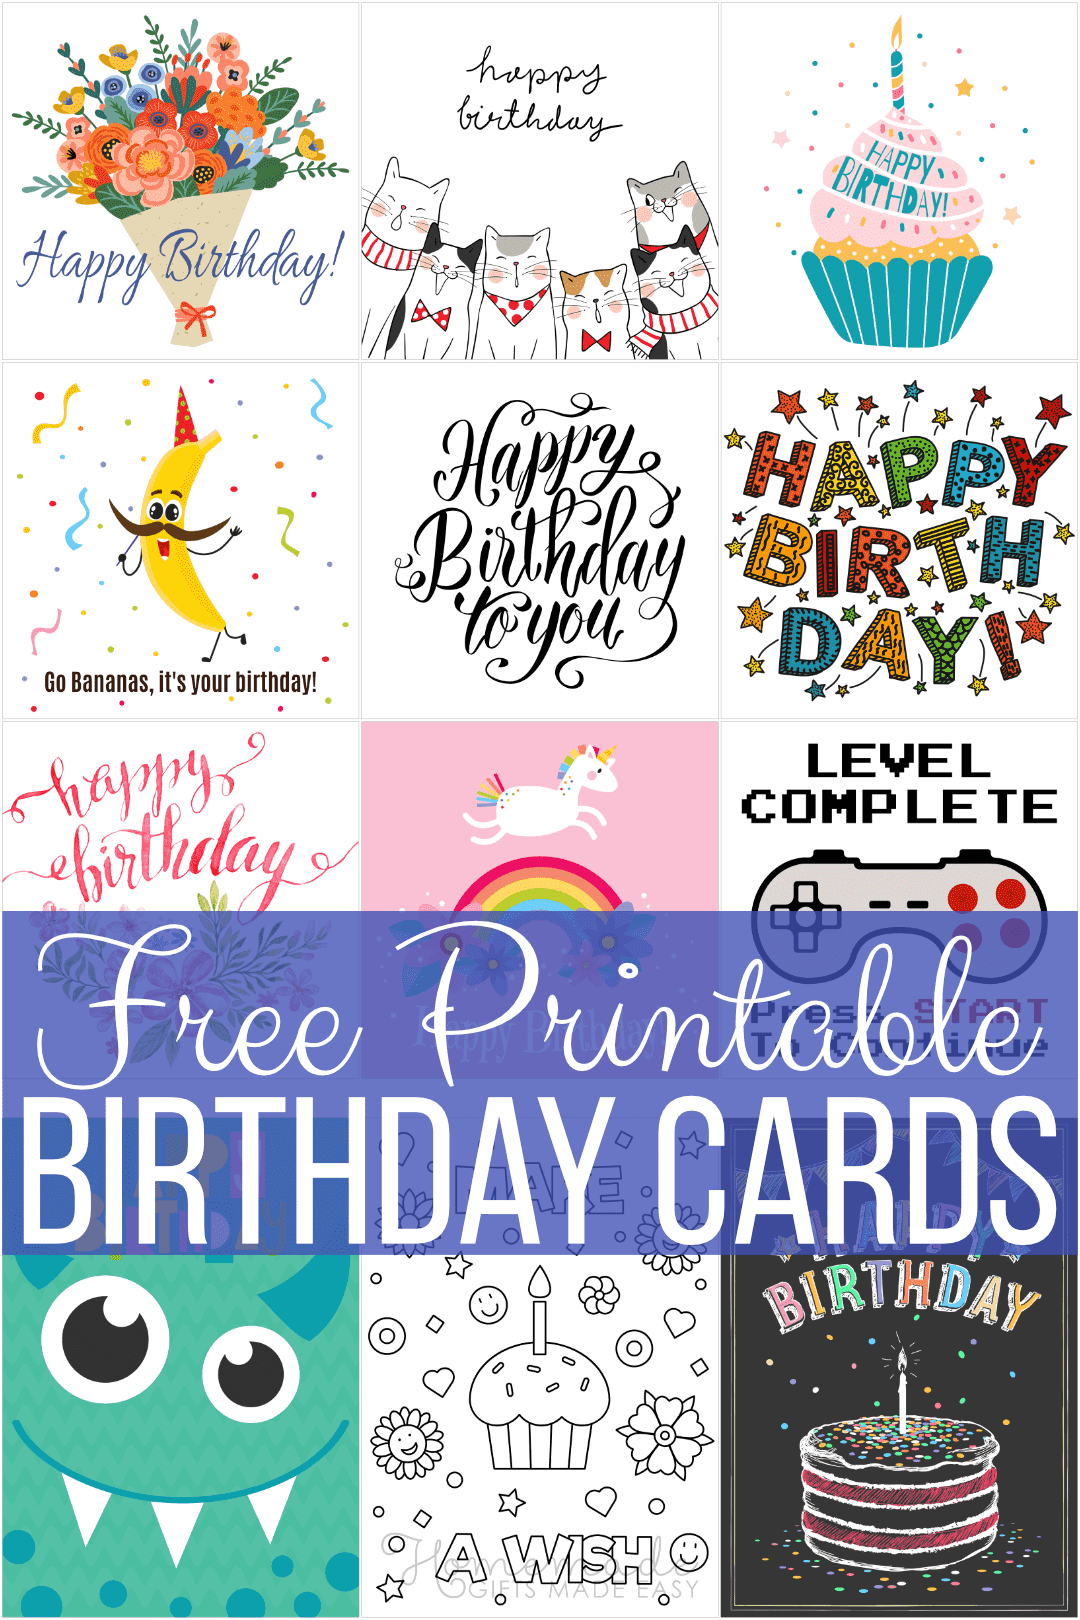 Free Printable Birthday Cards For Everyone regarding Free Printable Happy Birthday Cards